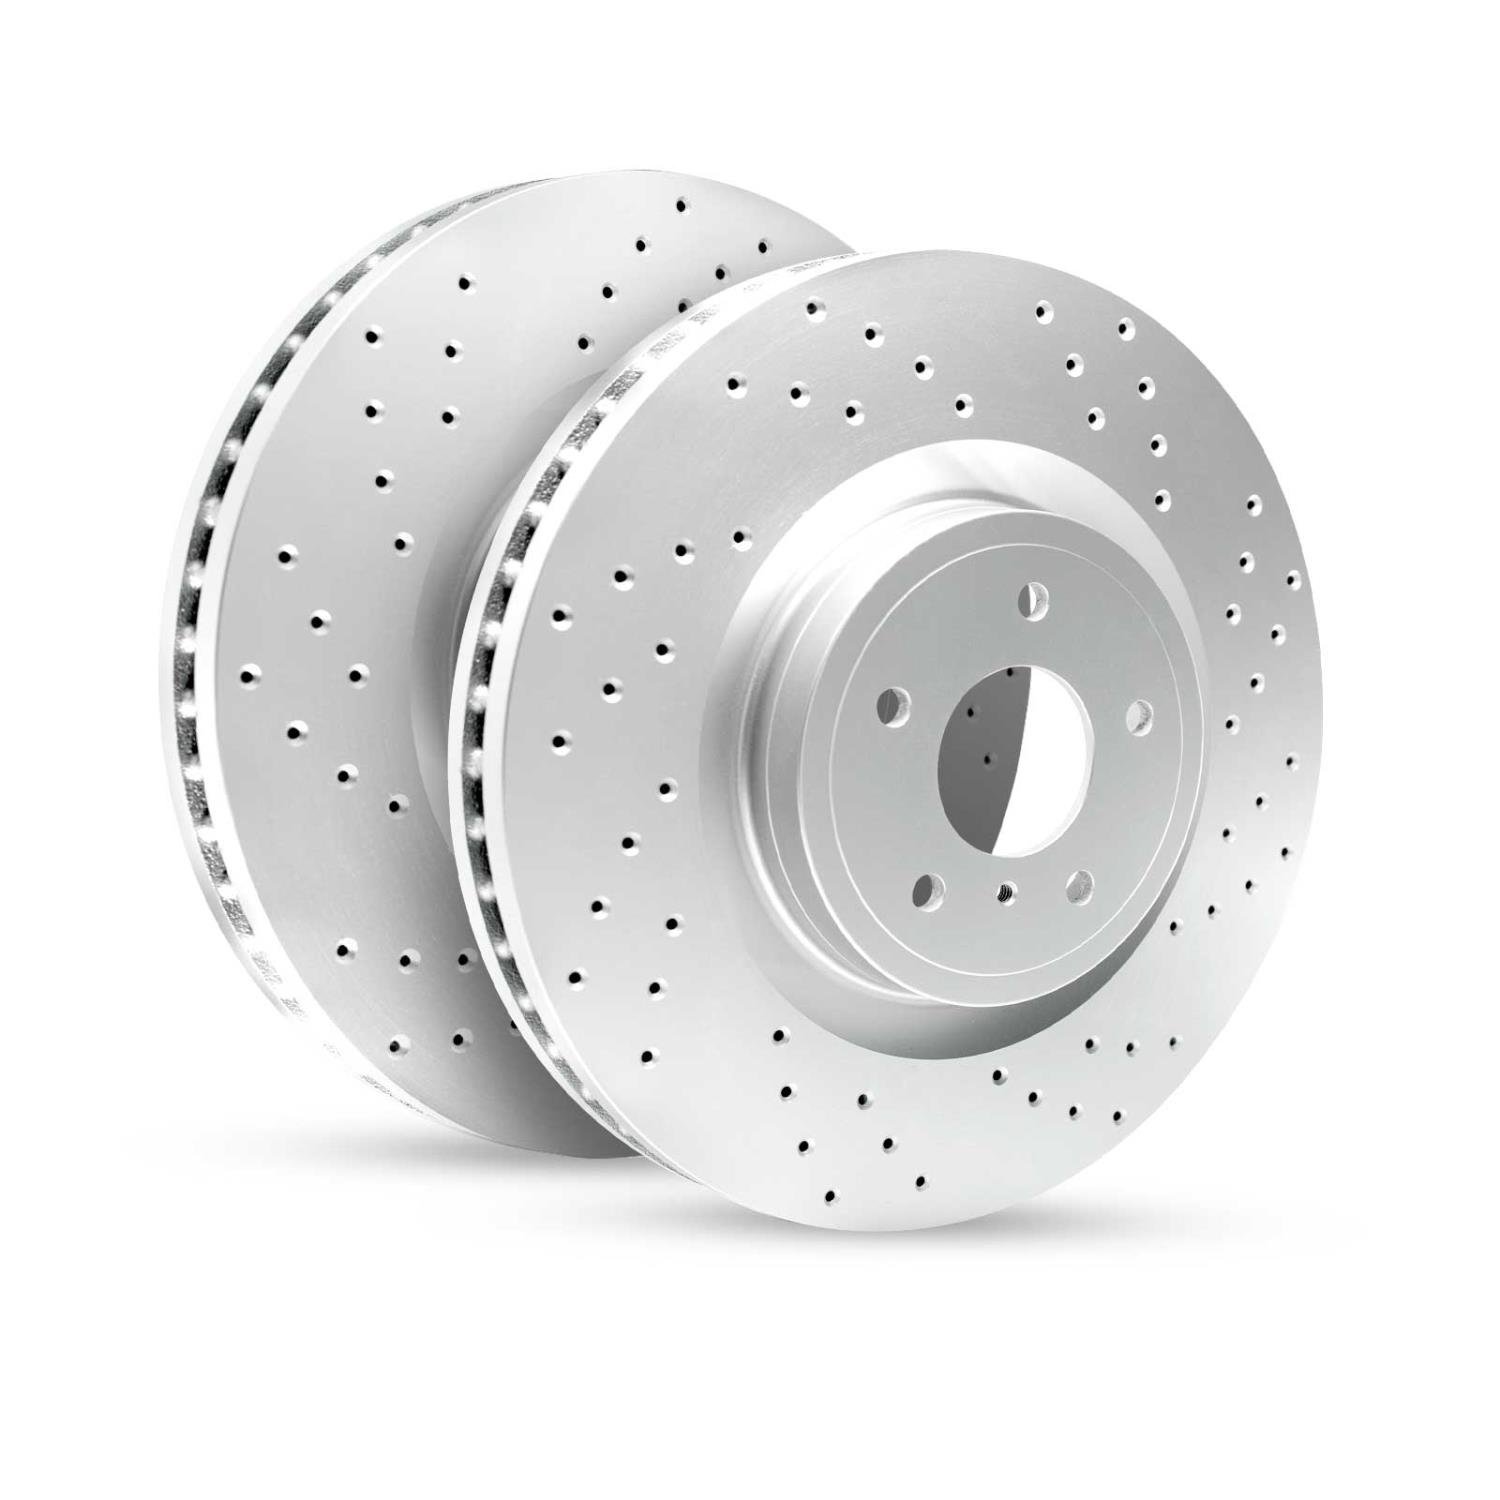 GEO-Carbon Drilled/Slotted Rotors, 2014-2019 Infiniti/Nissan,